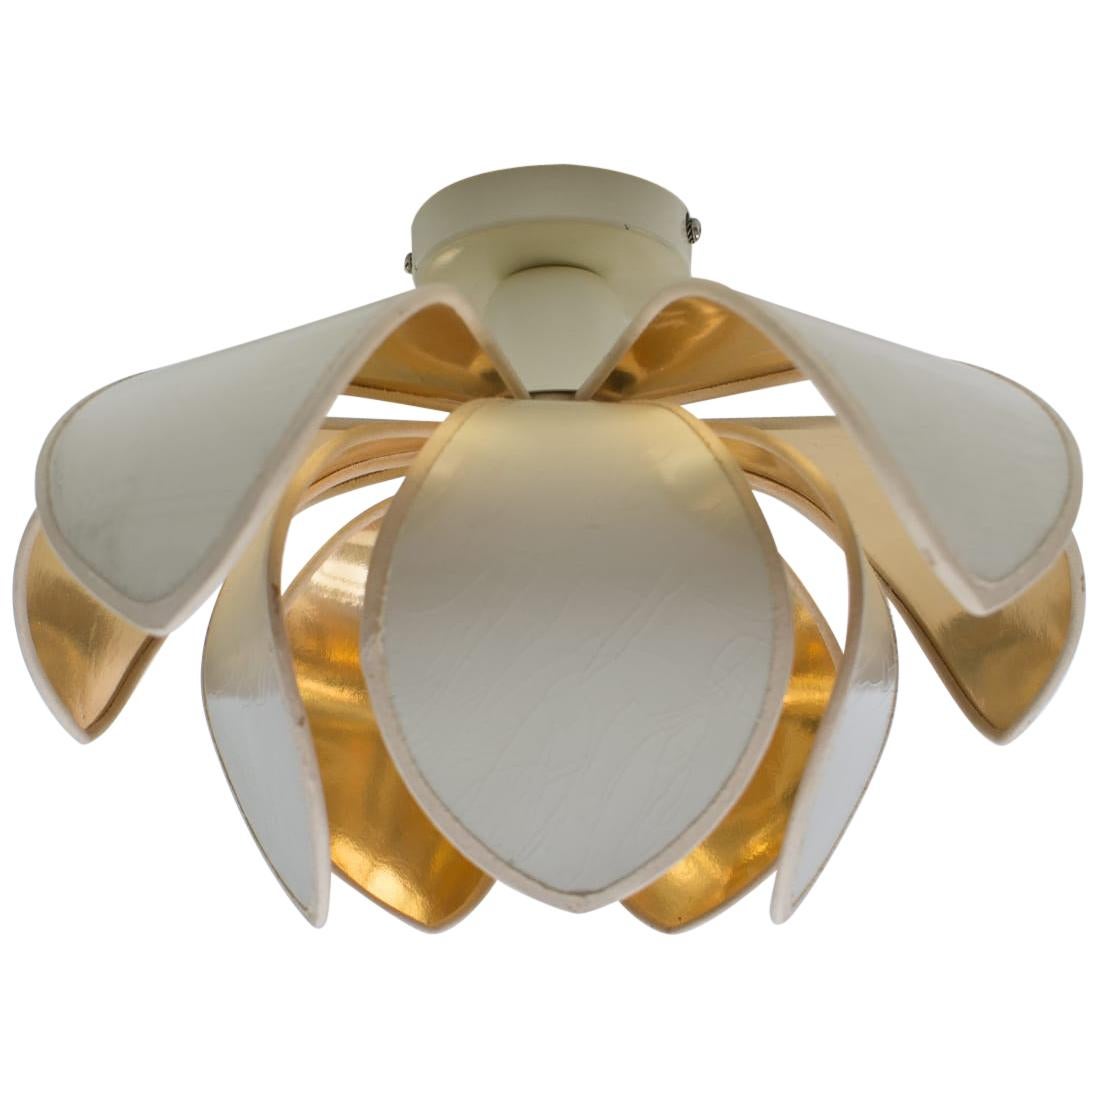 Ceiling or Wall Flower Blossom Lamp by Le Dauphin, Saint Marcellin, France 1970s